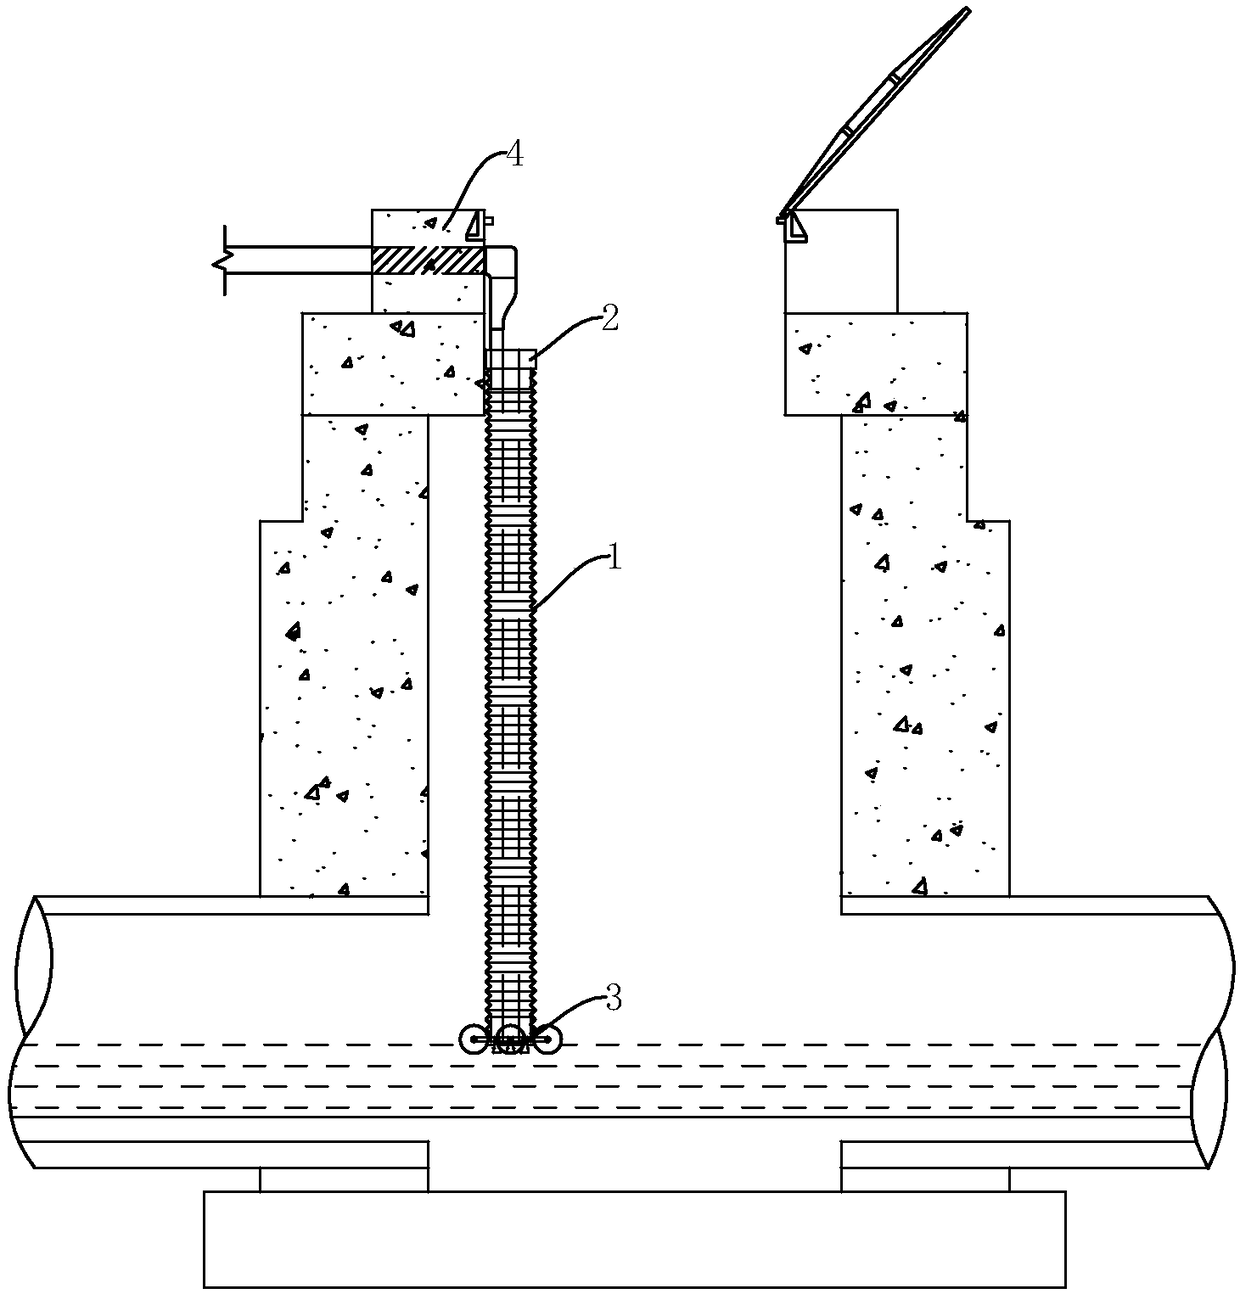 Urban pipeline water quality monitoring and water intake device